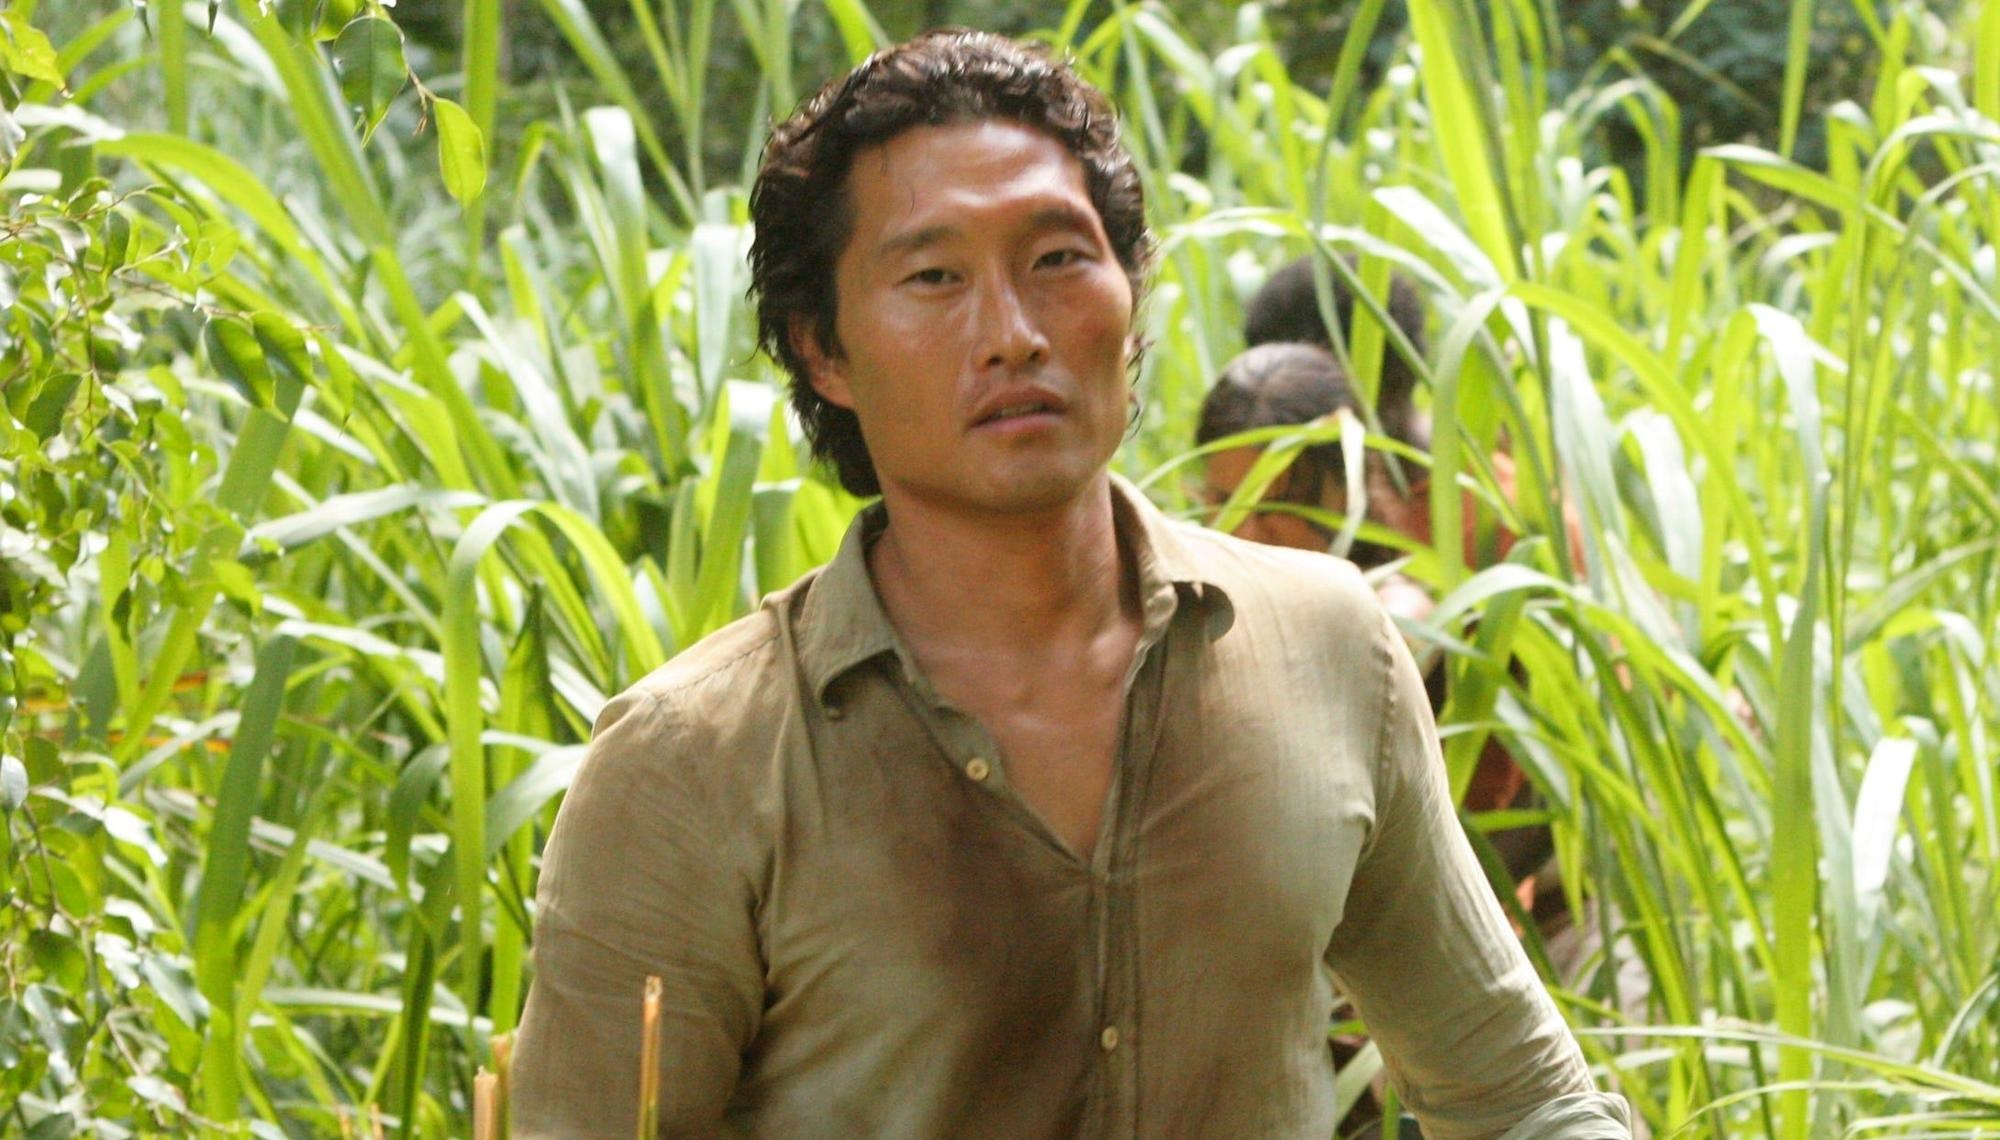 Daniel Dae Kim makes people nervous on airplanes, which is understandable